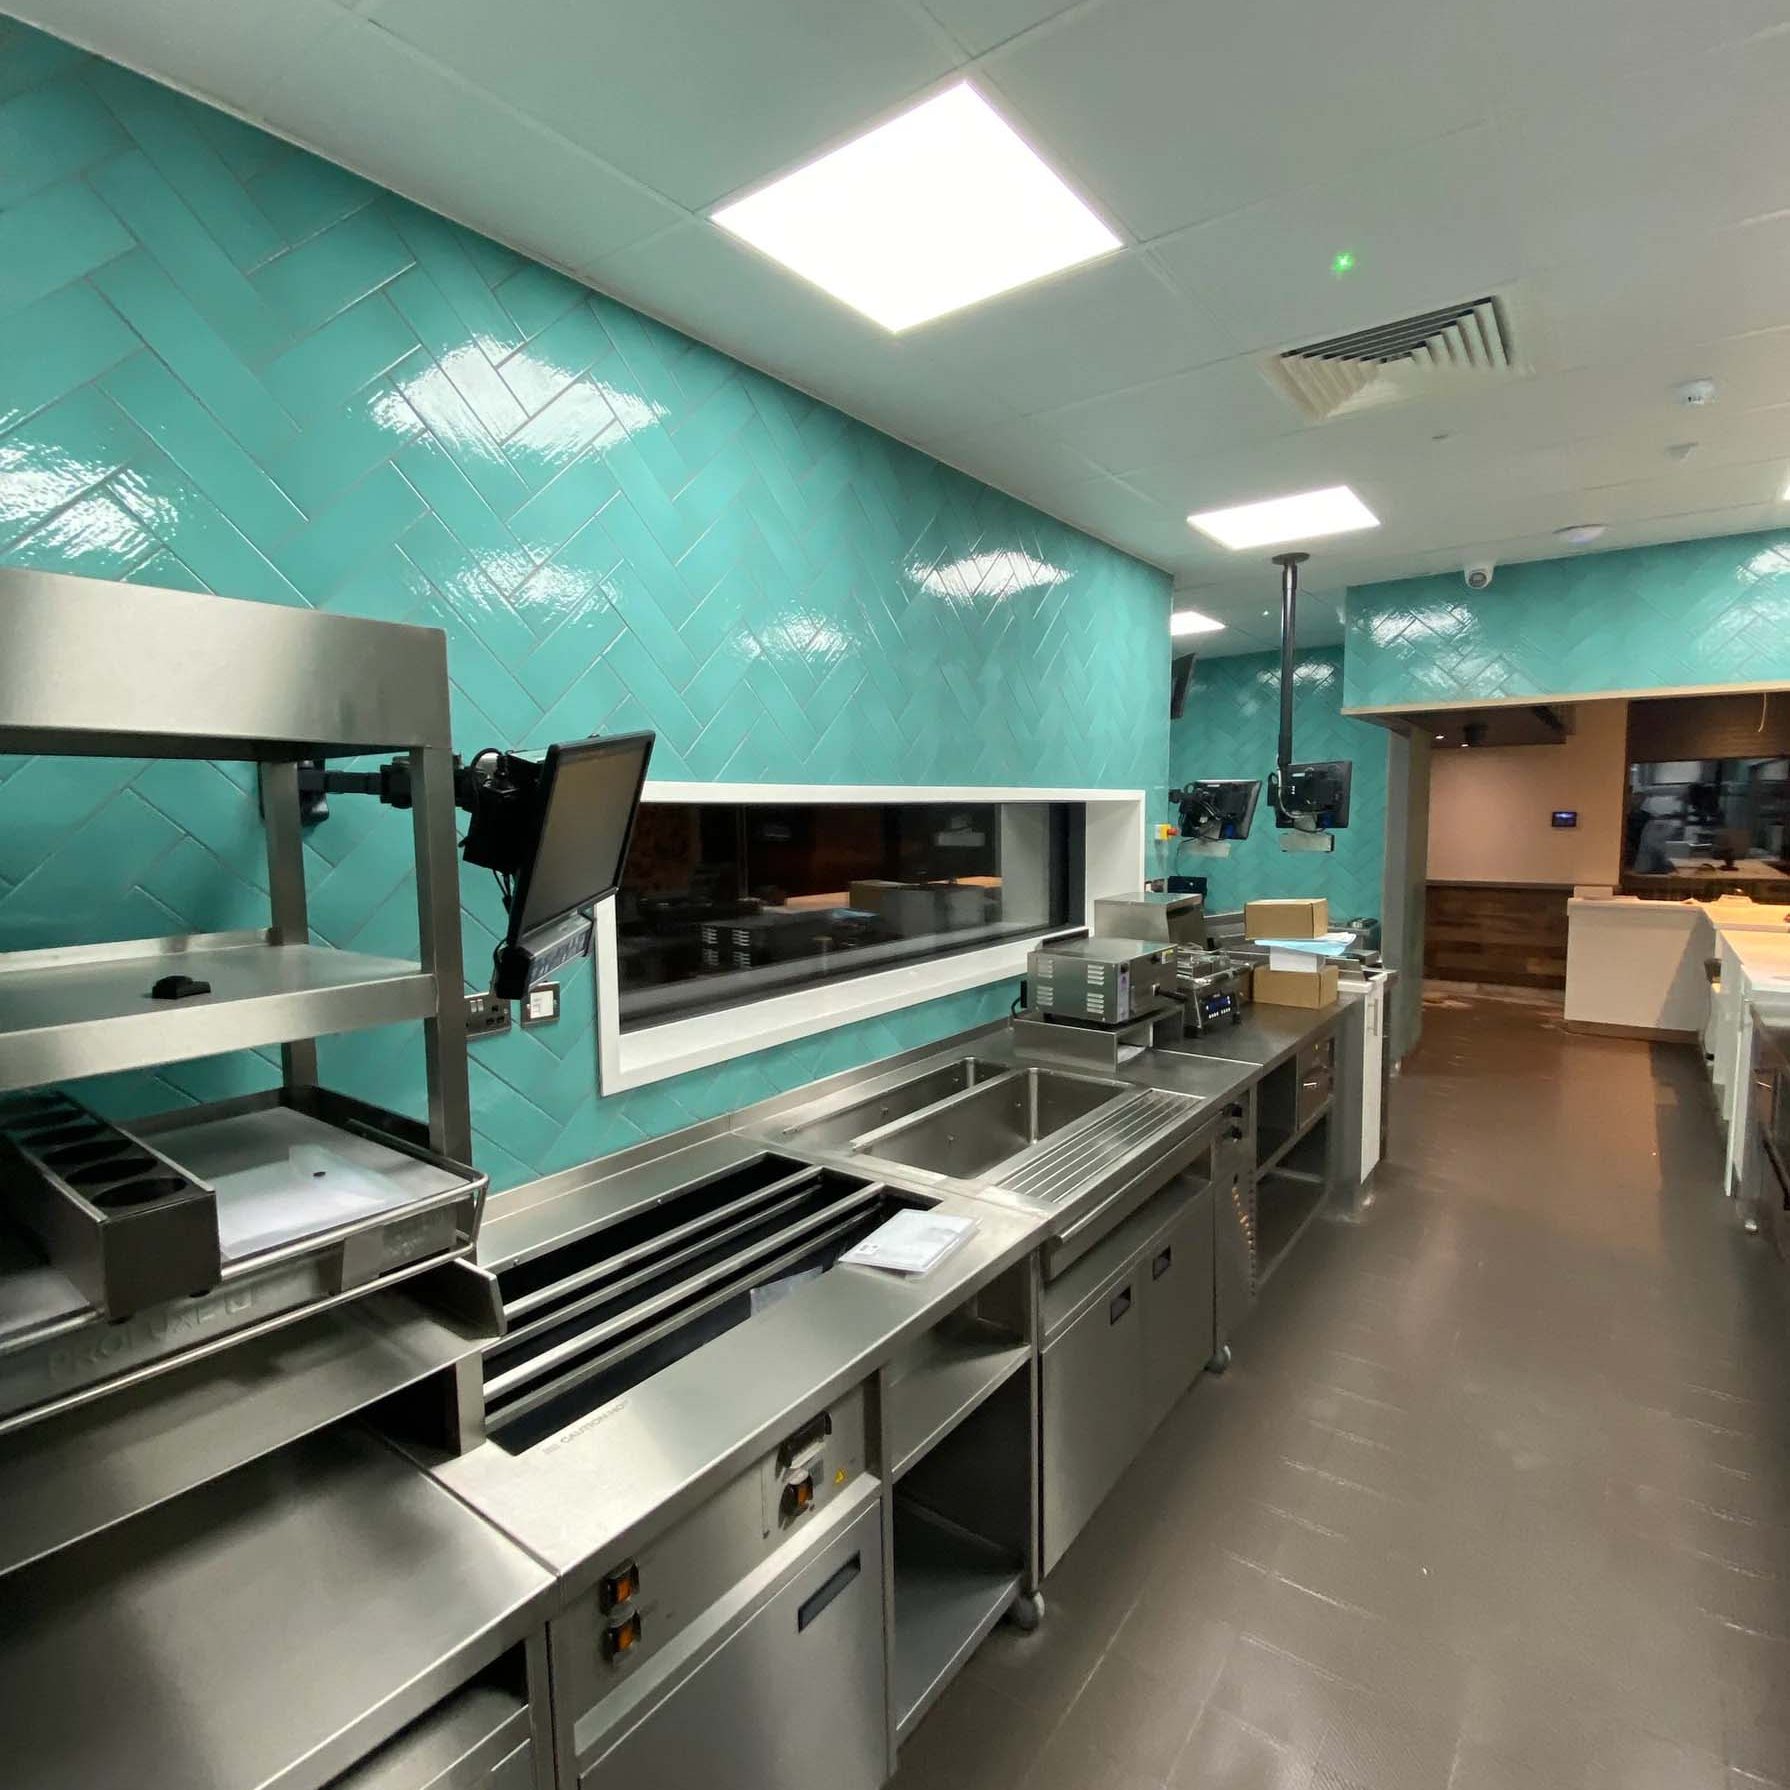 Commercial Kitchen with blue herring bone tiles walls